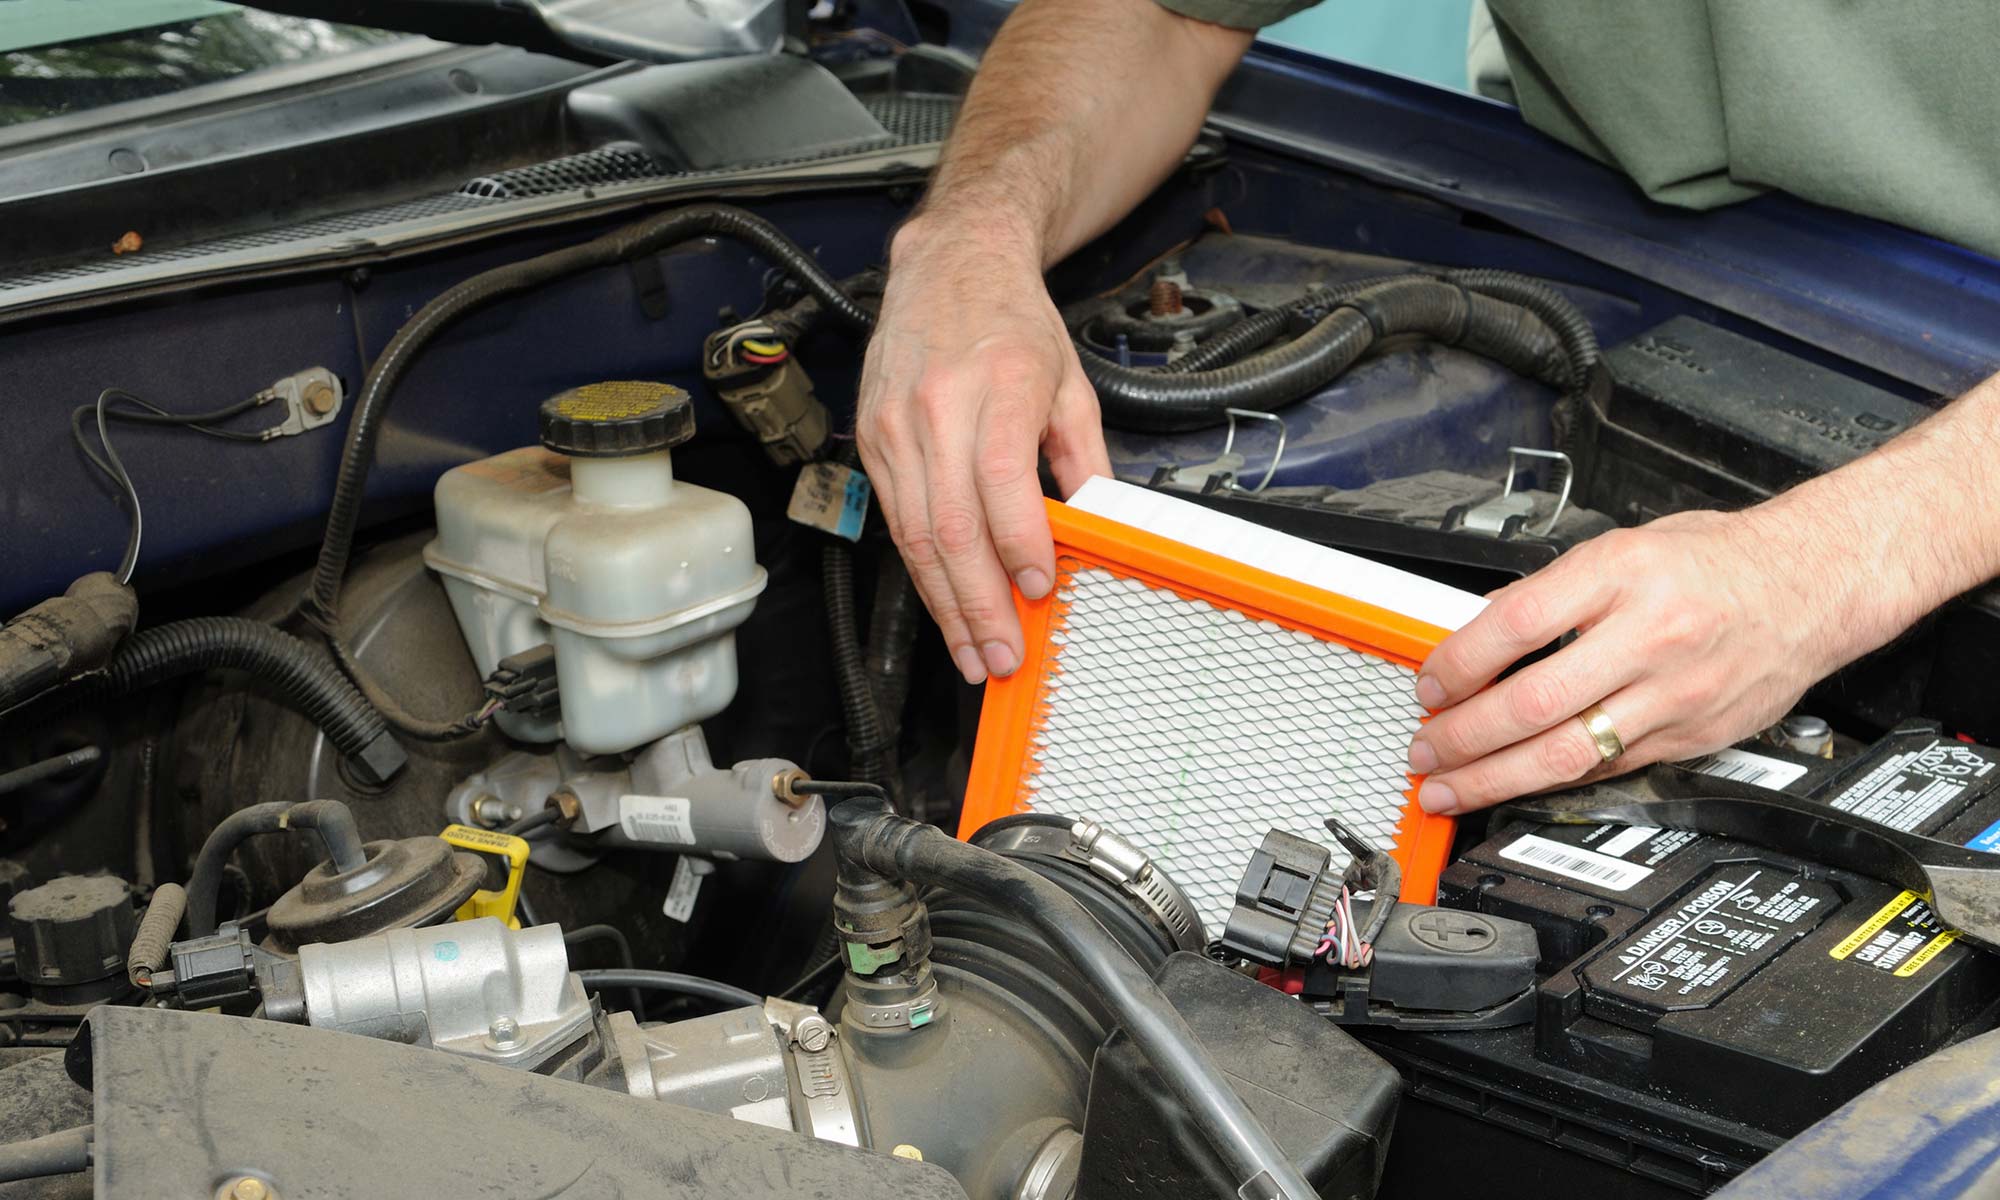 A mechanic changing a car's engine air filter.